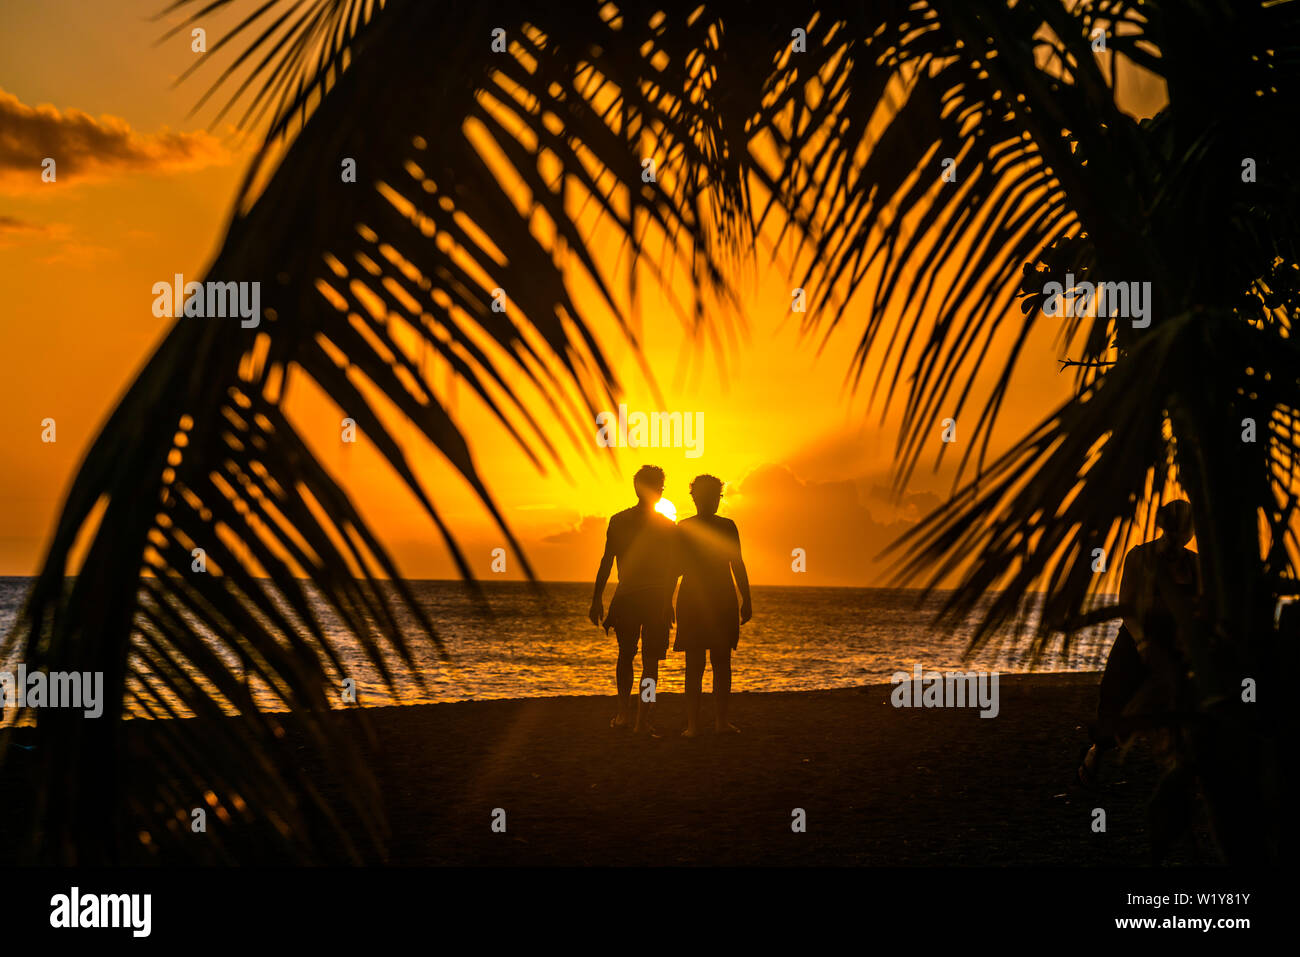 Sonnenuntergang am Strand unter Palmen am Meer, Guadeloupe, Frankreich  |  sunset under palm trees at he beach in Guadeloupe, France Stock Photo